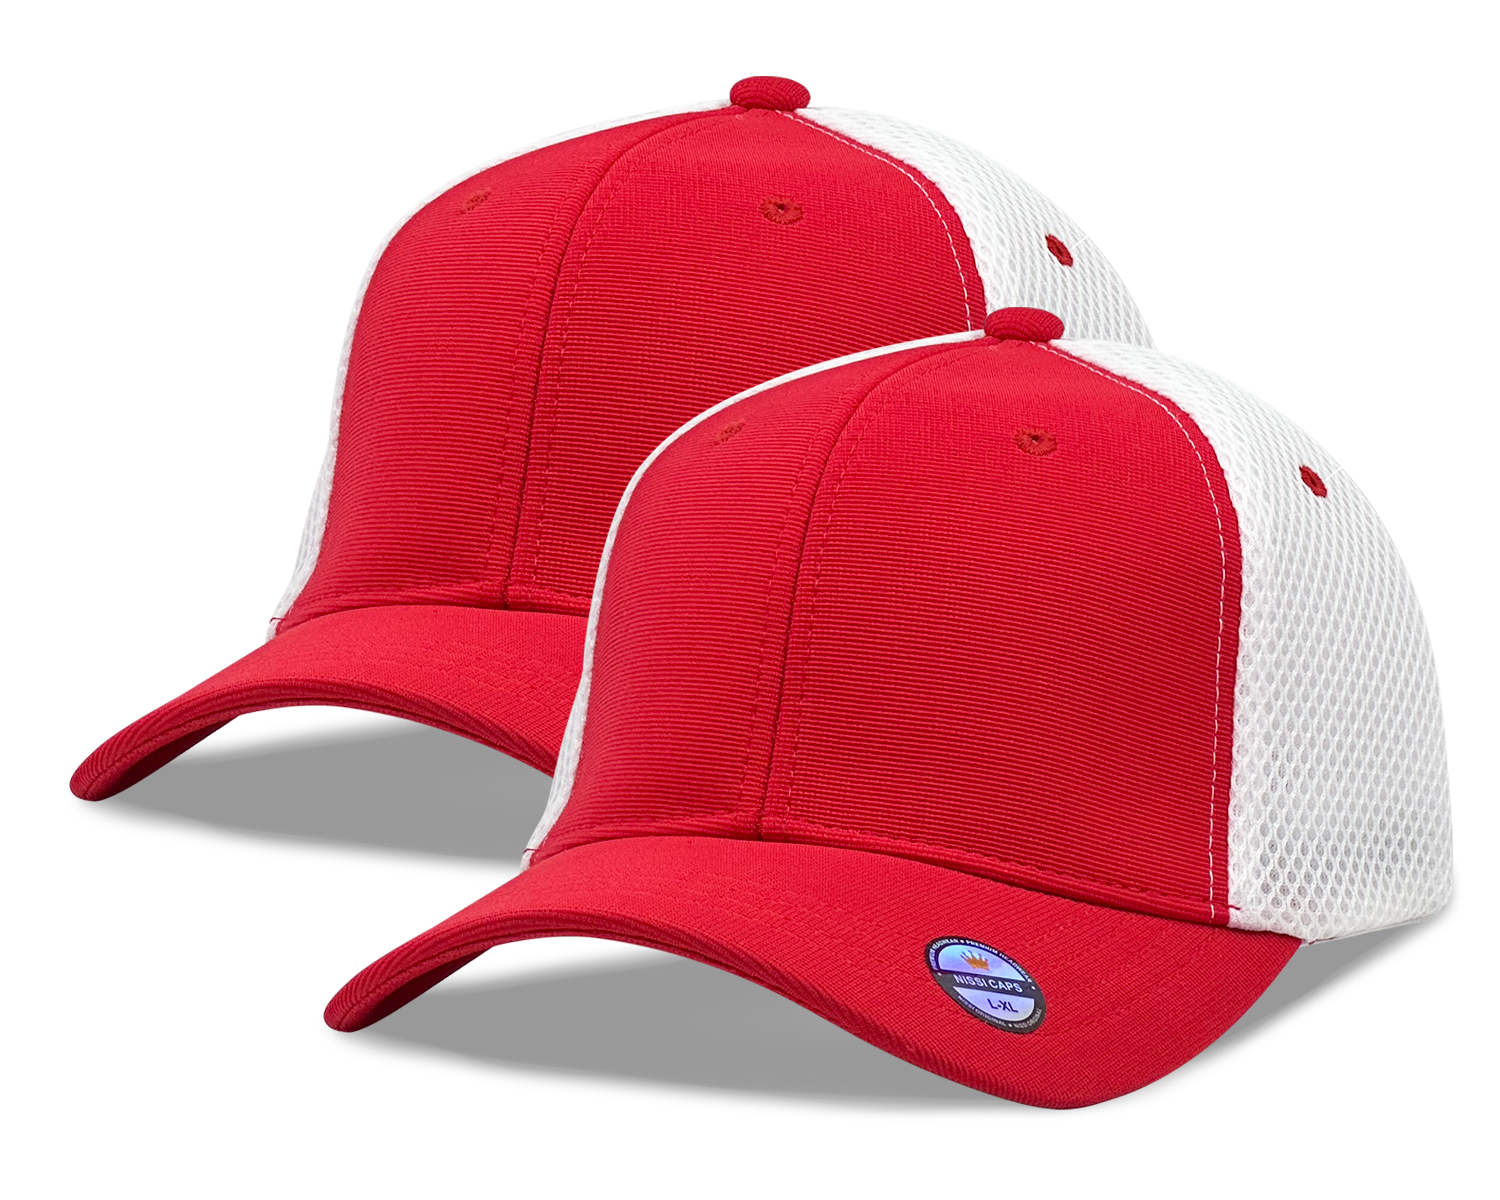 L2K 9002 Hybrid Stretch-Fitted Trucker Cap with Air Mesh (2 Pack)